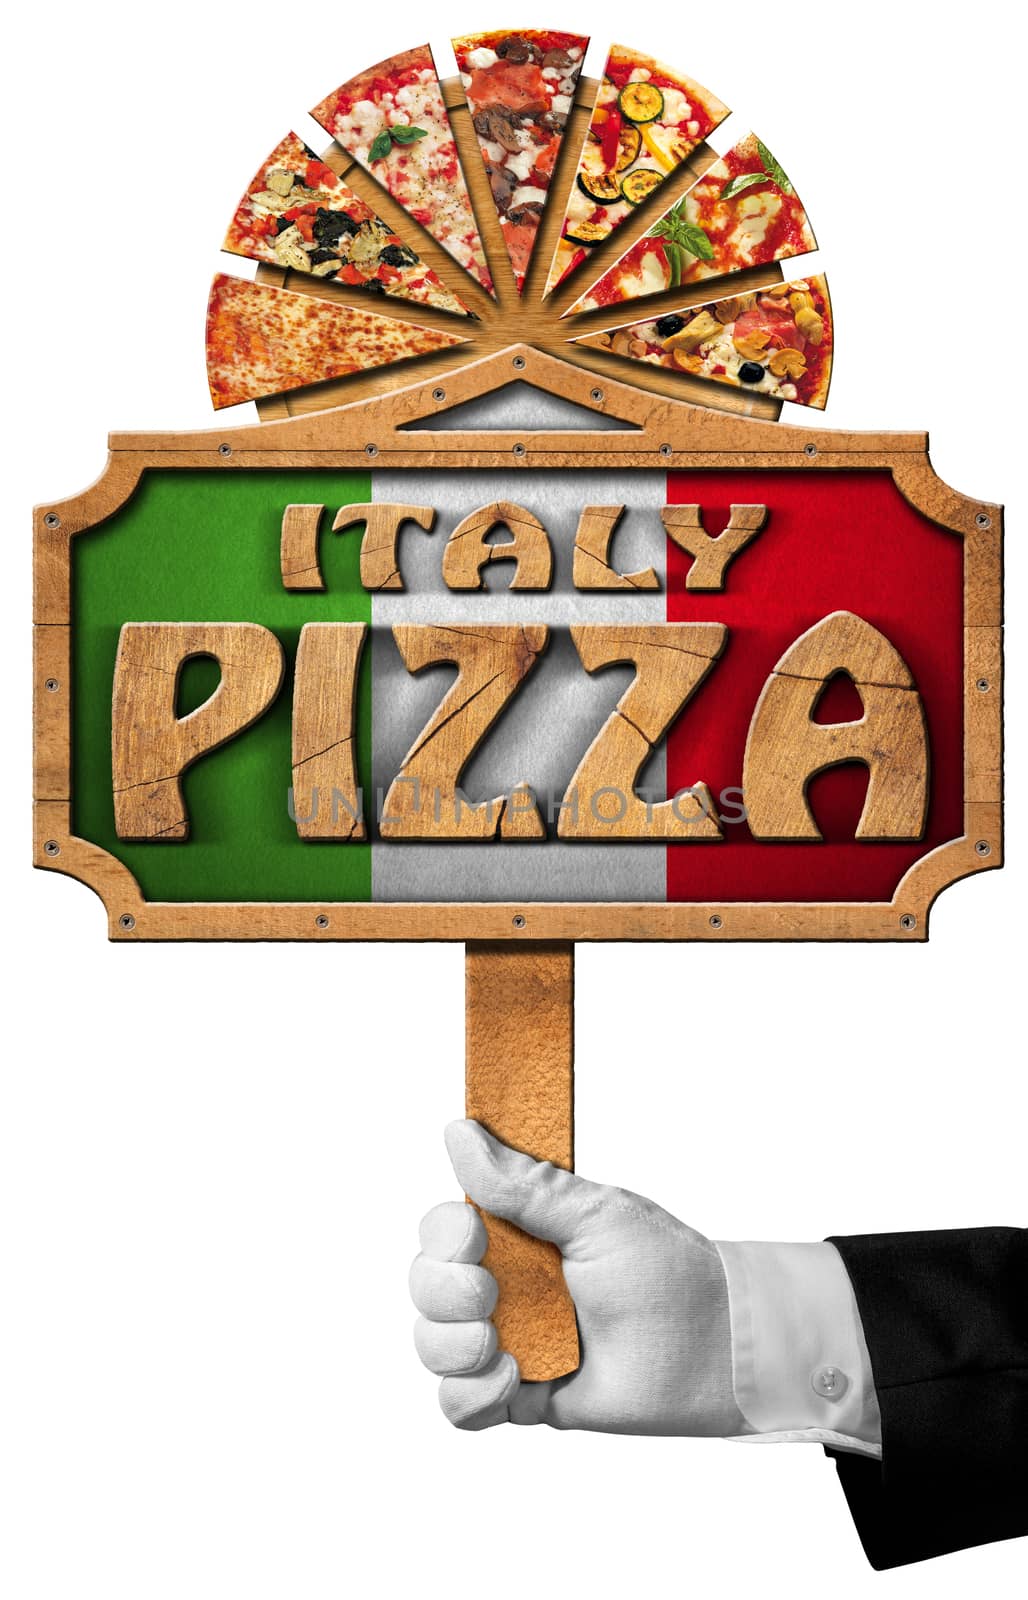 Hand of waiter with white glove holding a pole with wooden sign with frame and text Italy Pizza, slices of pizza on cutting board. Isolated on a white background